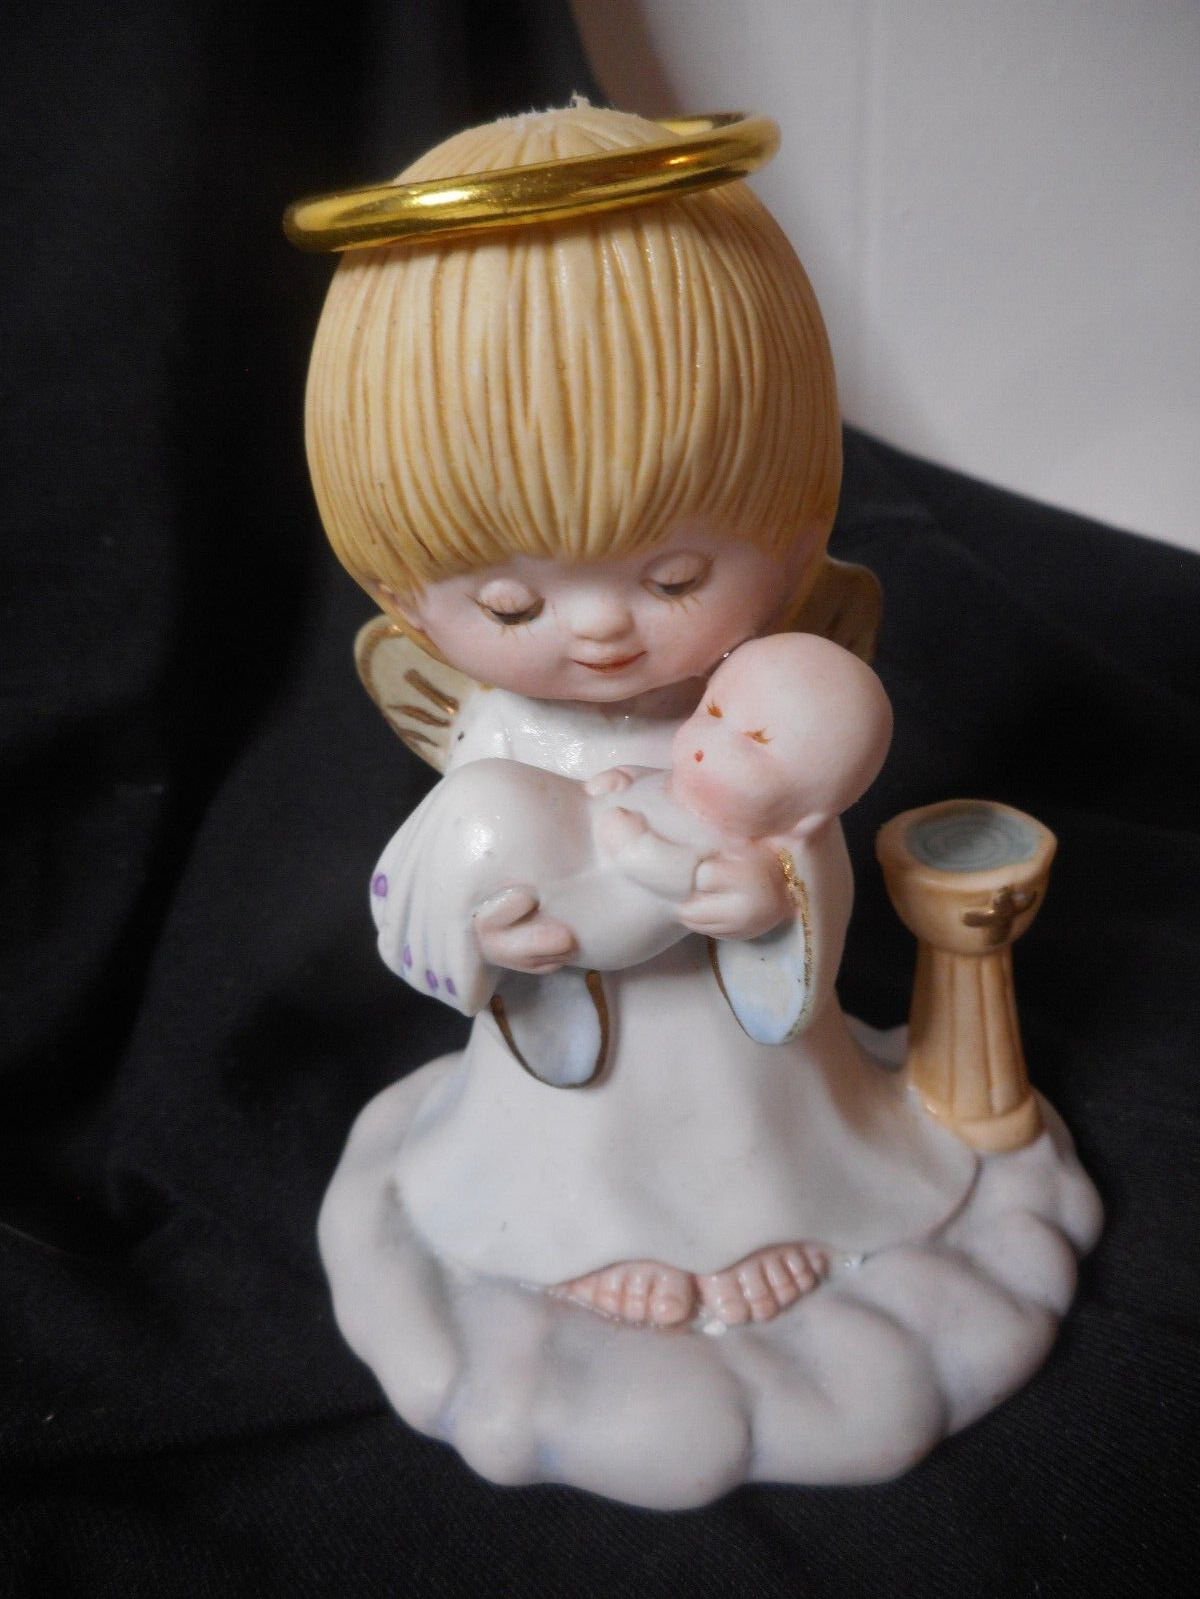 Precious Moments Ceramic Figurine Baptism is a beginning of a life w love grace